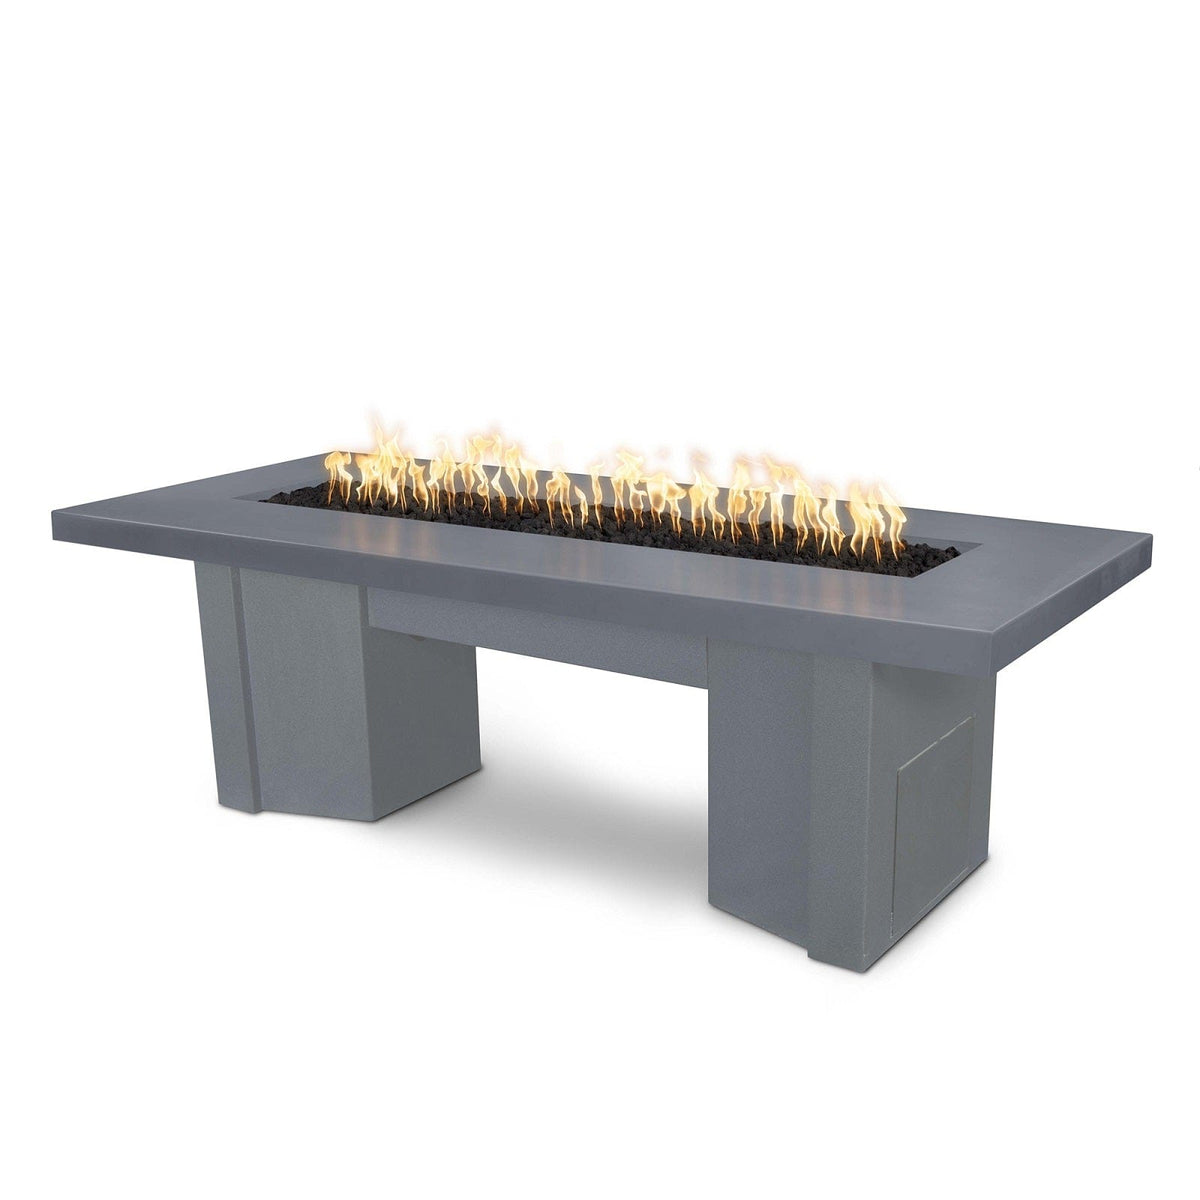 The Outdoor Plus Fire Features Gray (-GRY) / Gray Powder Coated Steel (-GRY) The Outdoor Plus 78&quot; Alameda Fire Table Smooth Concrete in Natural Gas - Match Lit / OPT-ALMGFRC78-NG